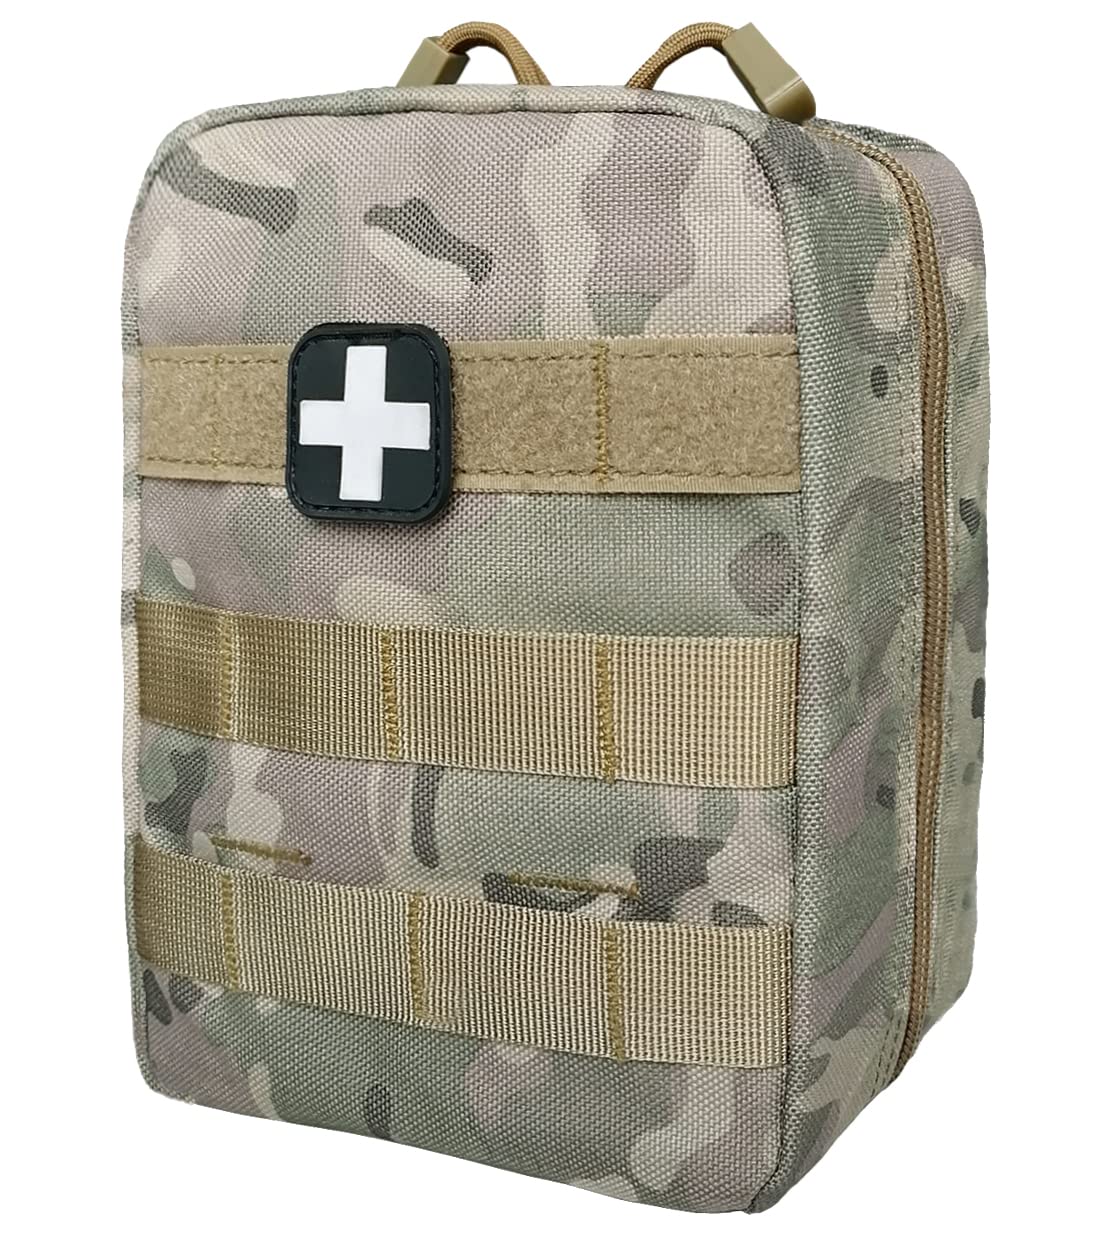 First Aid Pouch EMT IFAK Medical Pouch, Tactical MOLLE Utility